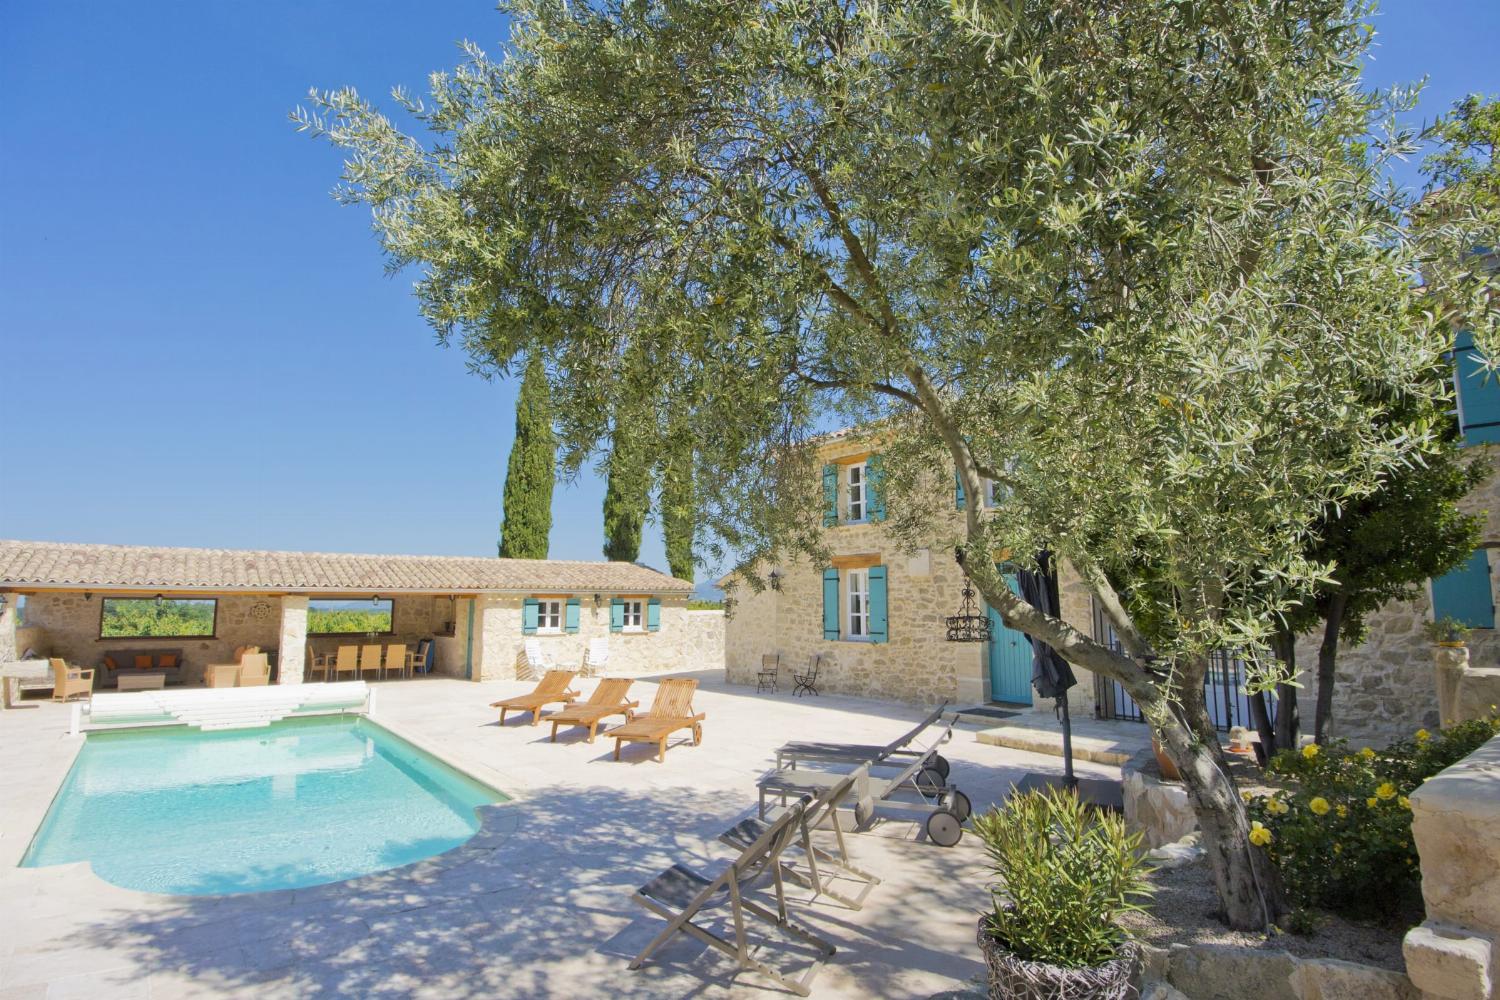 Rental accommodation in Provence with private pool